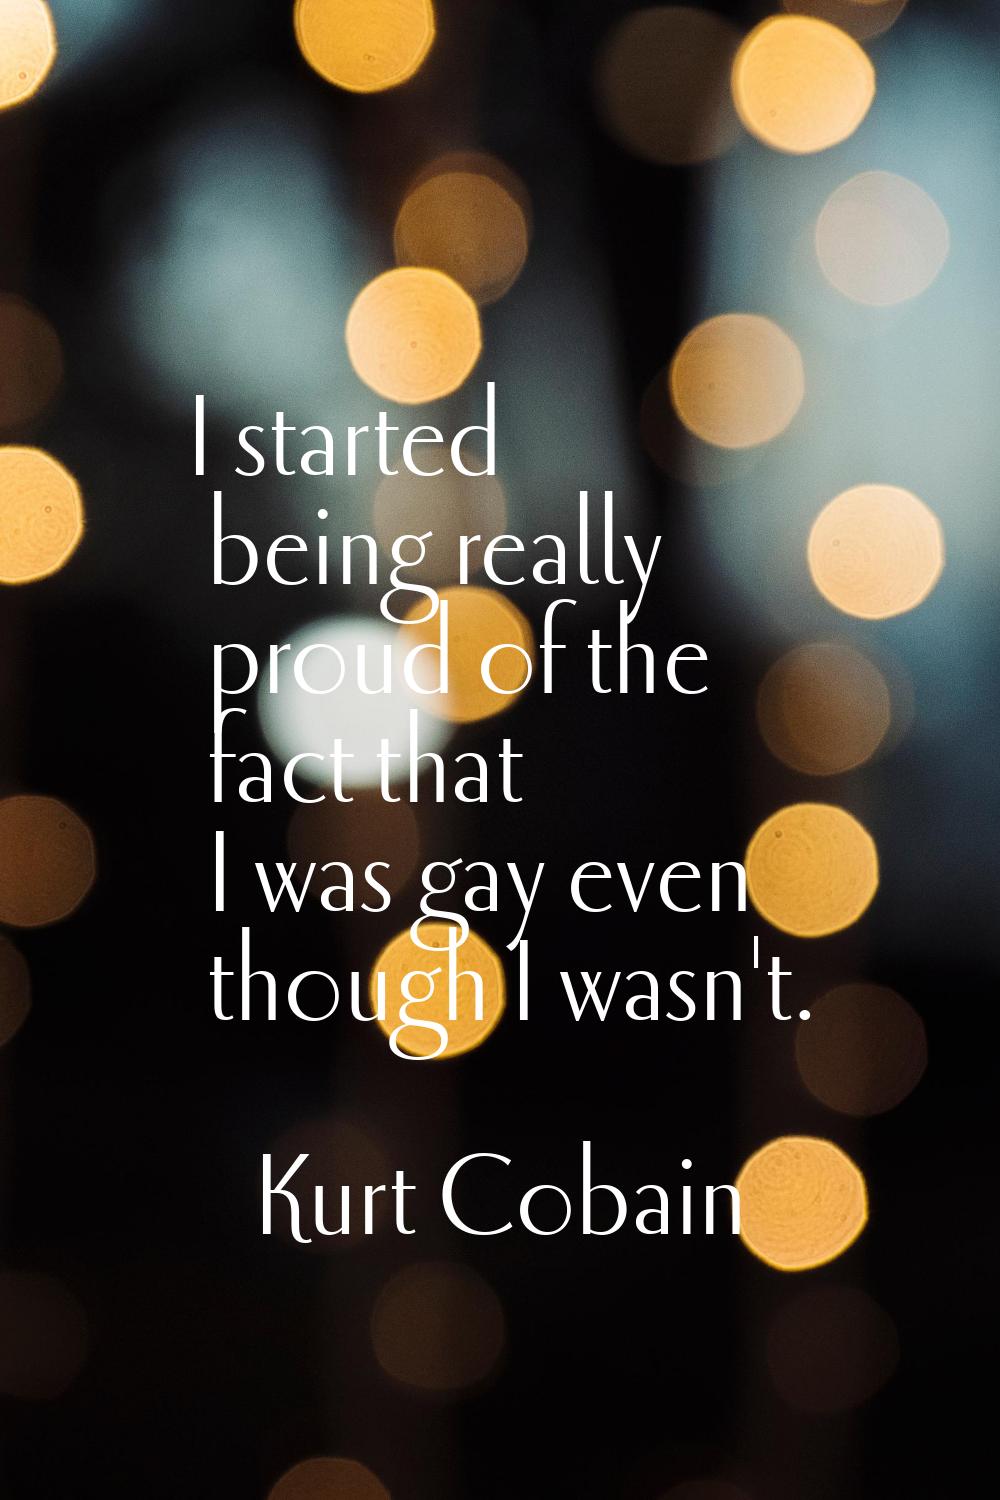 I started being really proud of the fact that I was gay even though I wasn't.